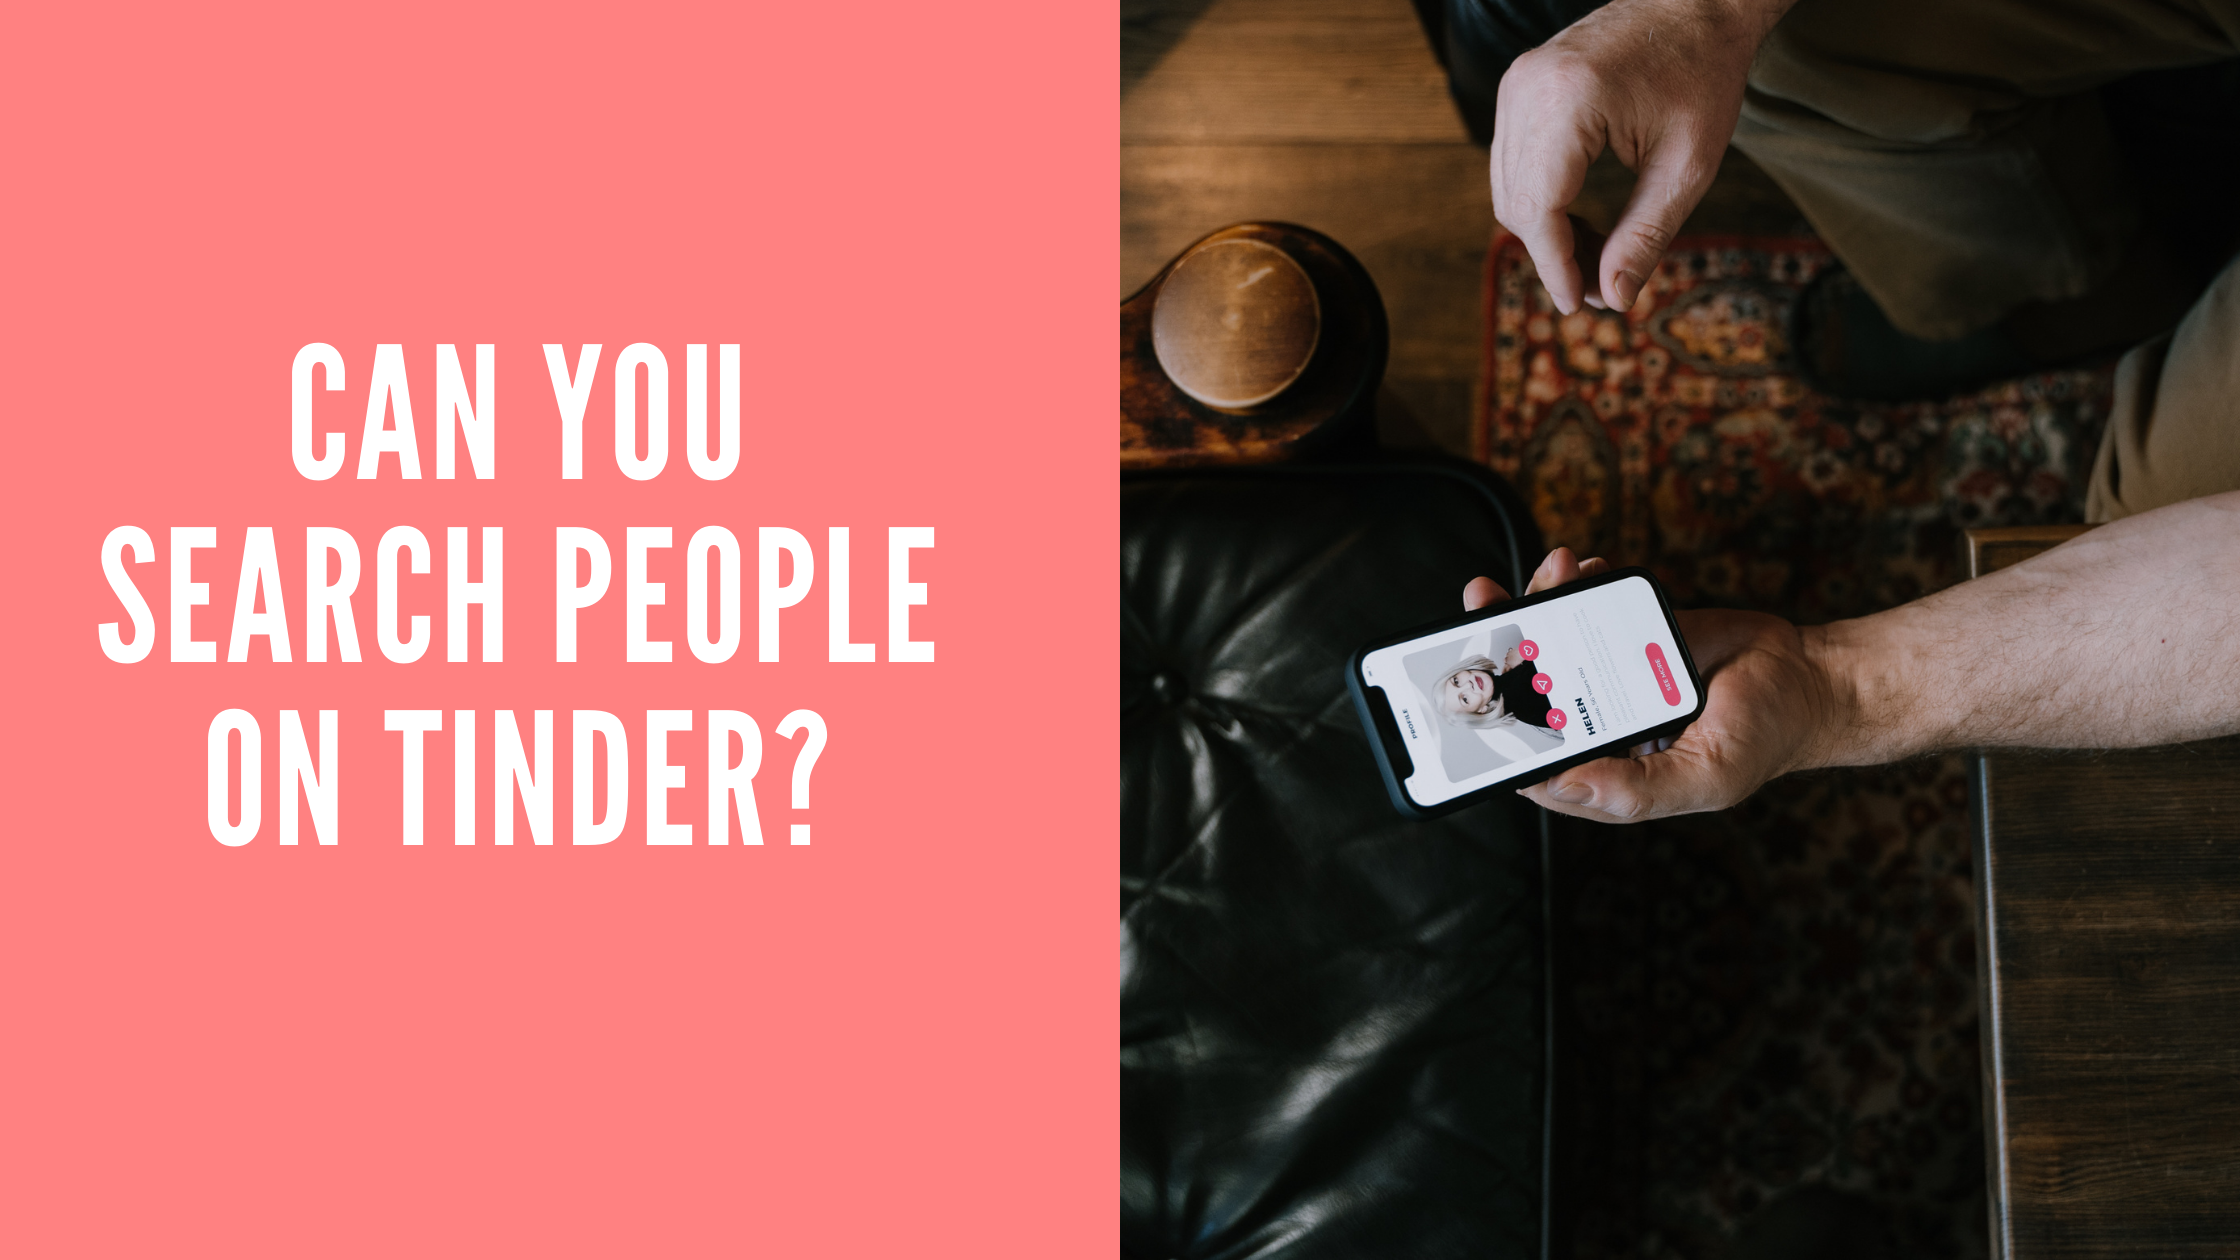 Can You Search People On Tinder?